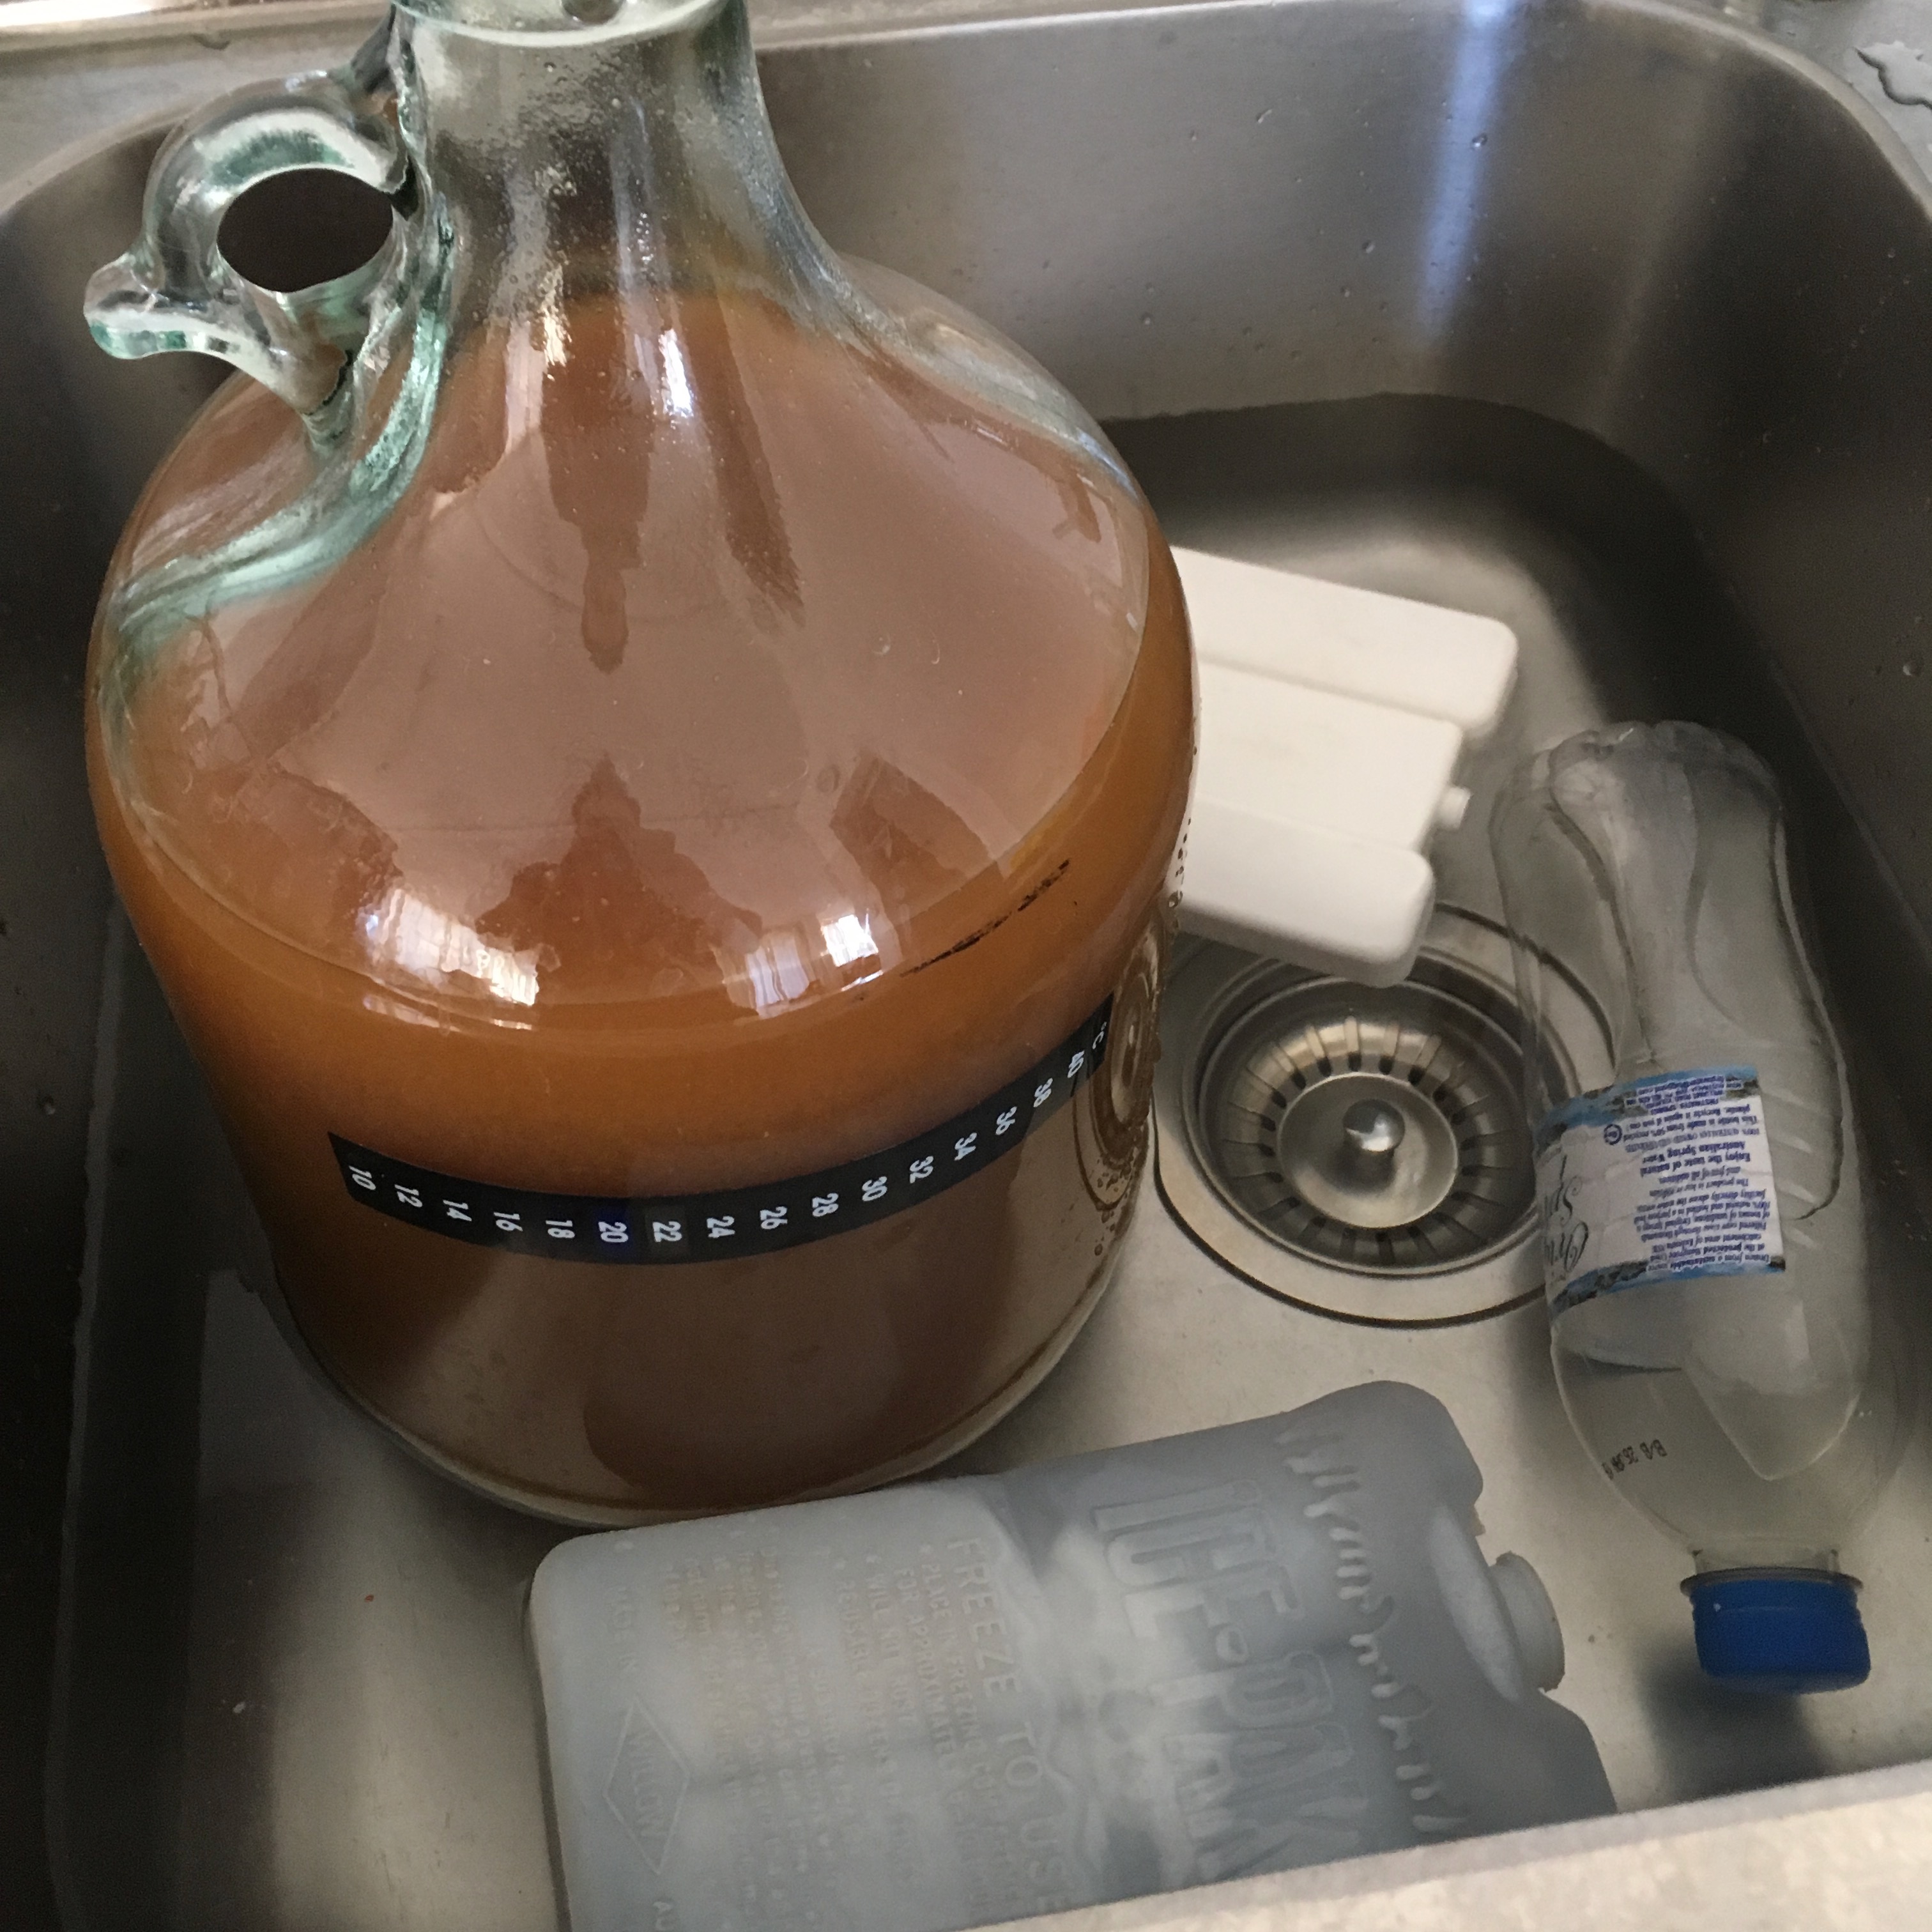 Cool the carboy down to the required yeast pitching temperature.